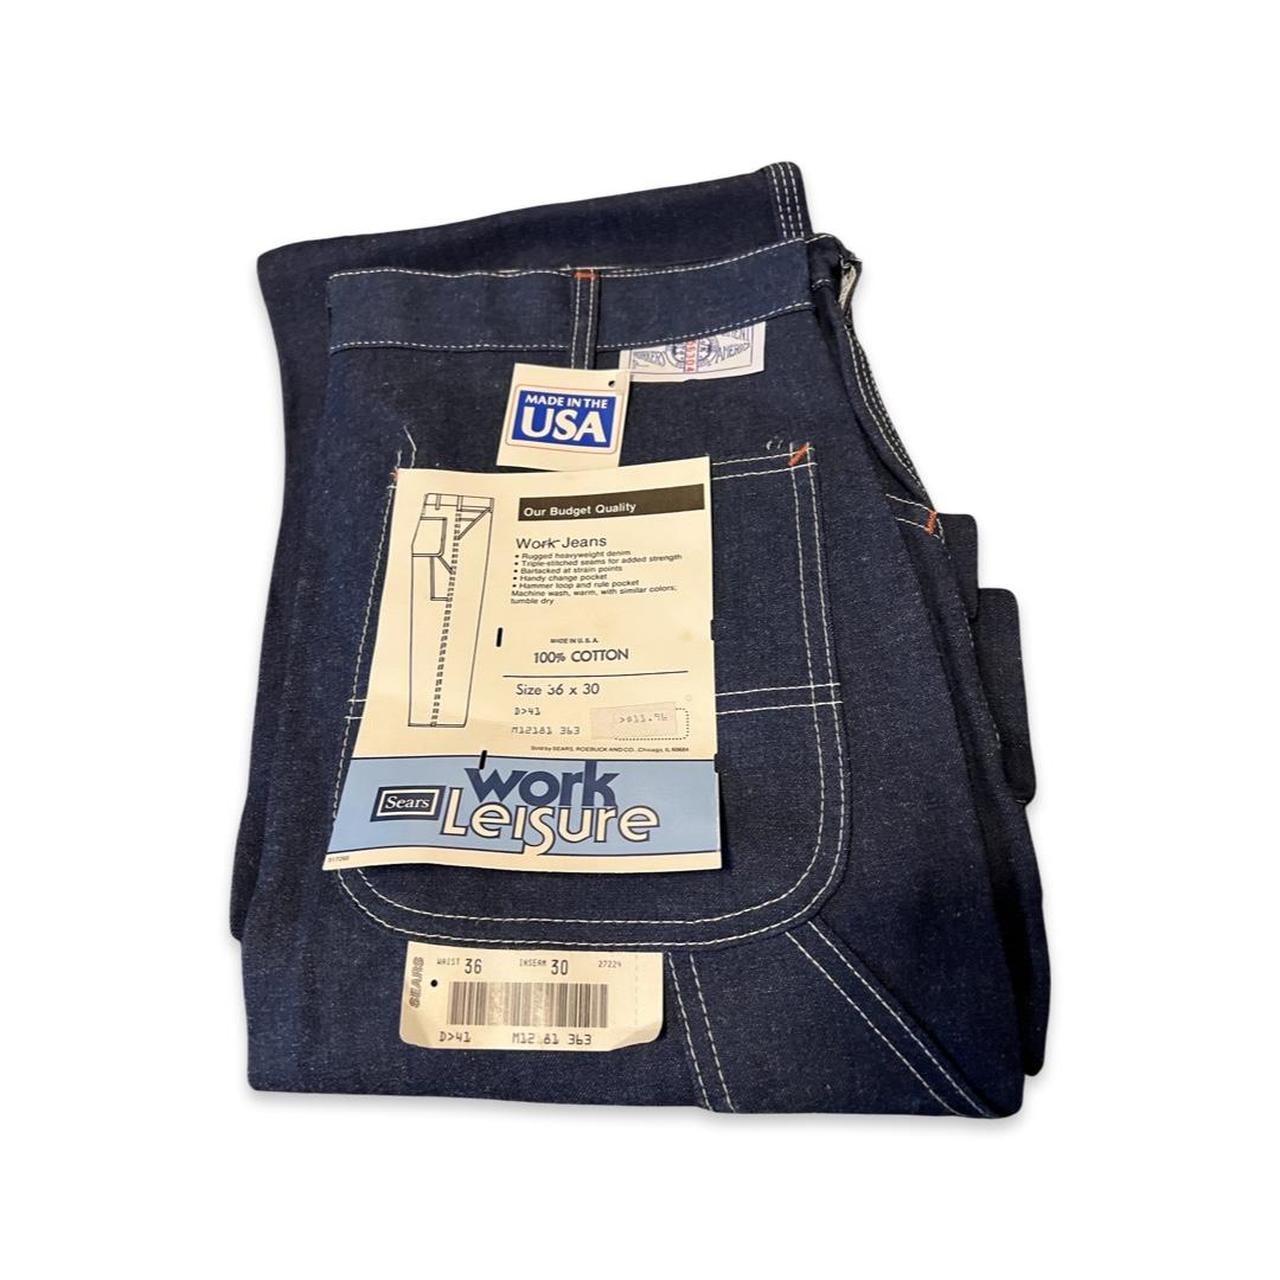 Sears, Jeans, Brand New Jeans Never Worn With Tags